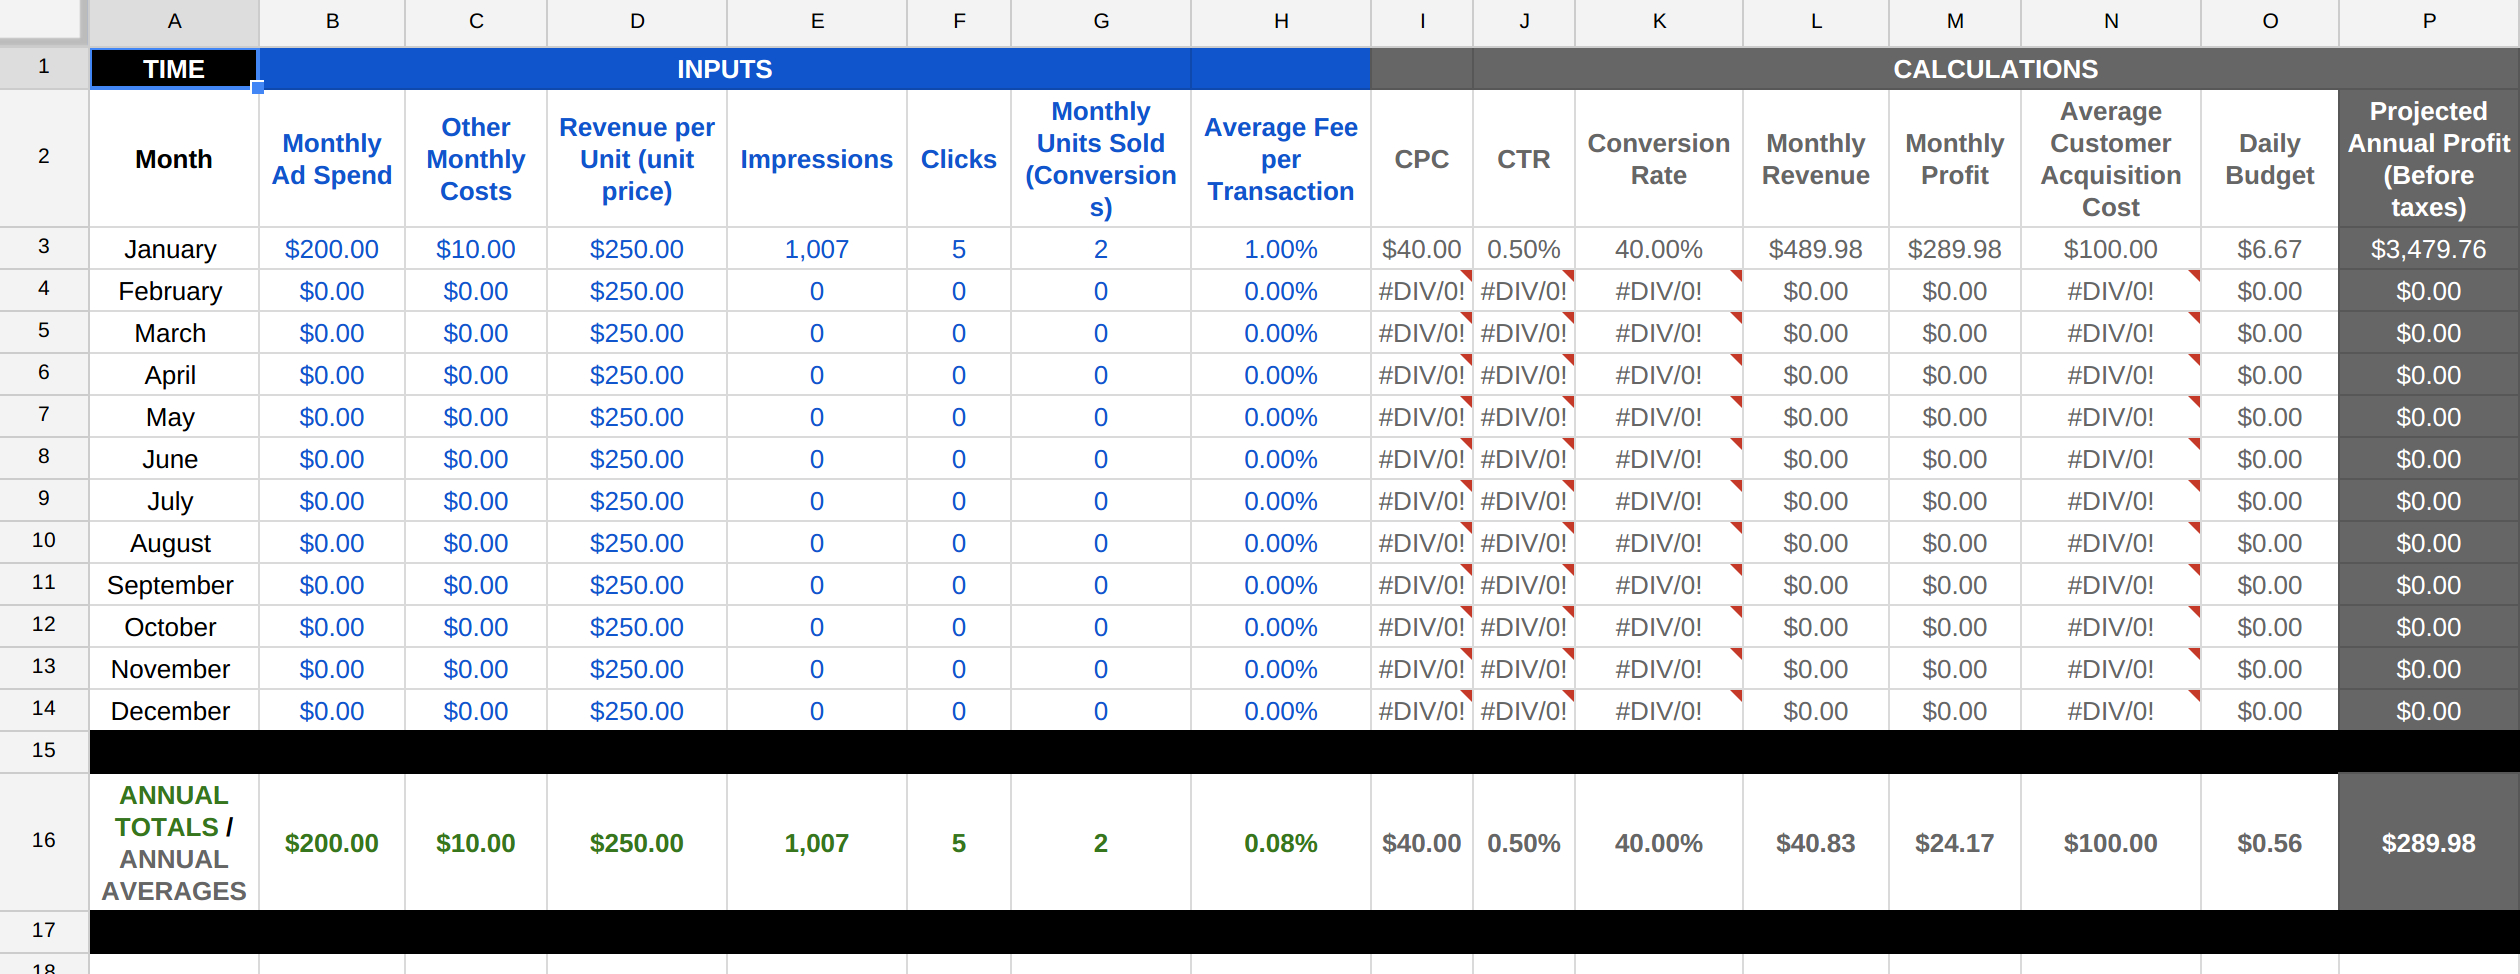 Tracking Customer Complaints Spreadsheet Within Sample Adwords Tracking Spreadsheet  Todd Zabel  Customer Support